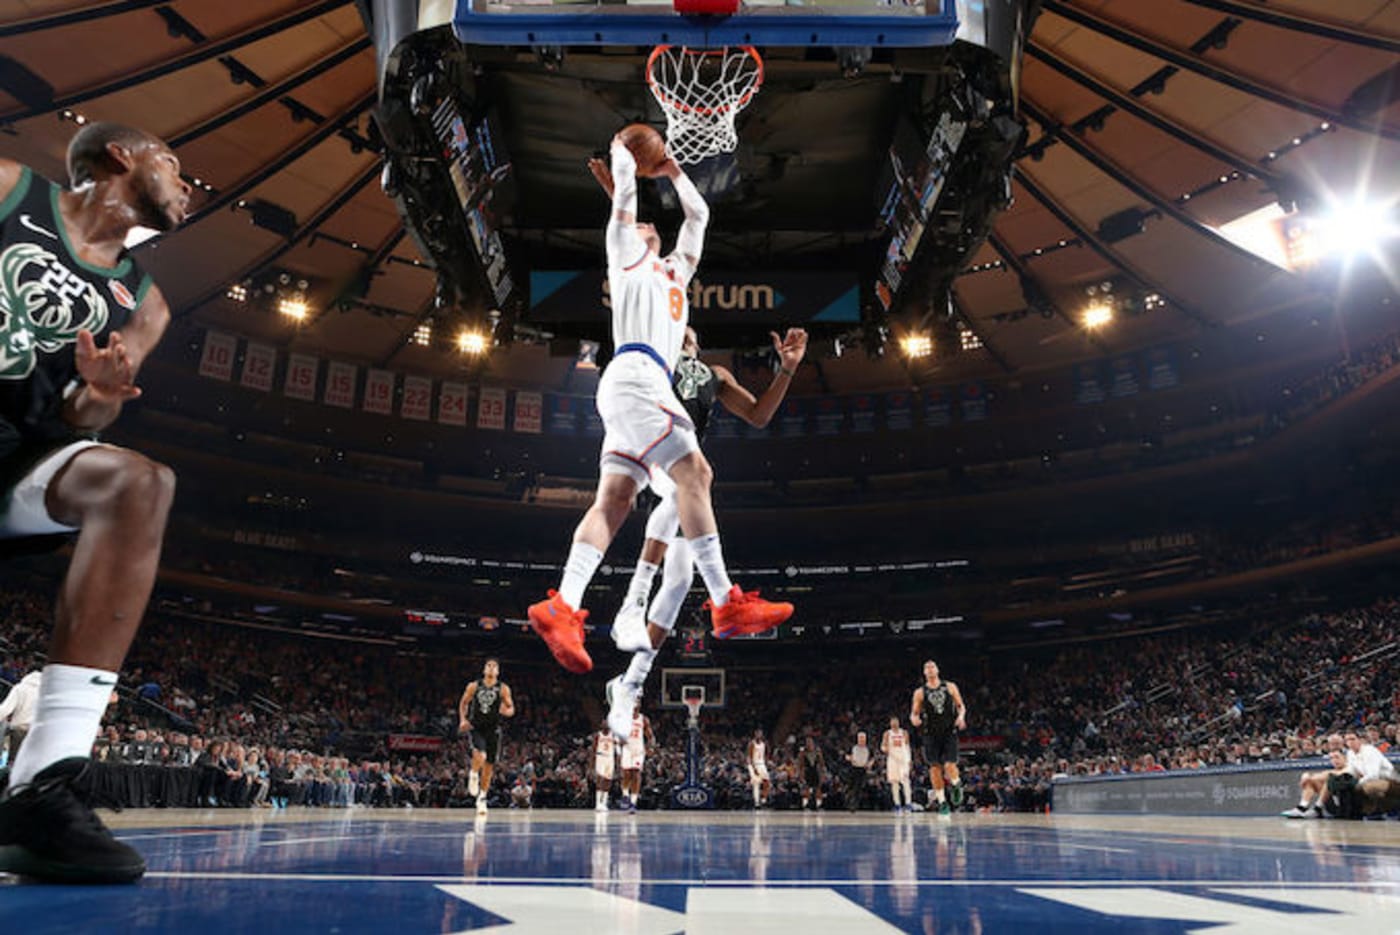 This is a picture of New York Knicks.